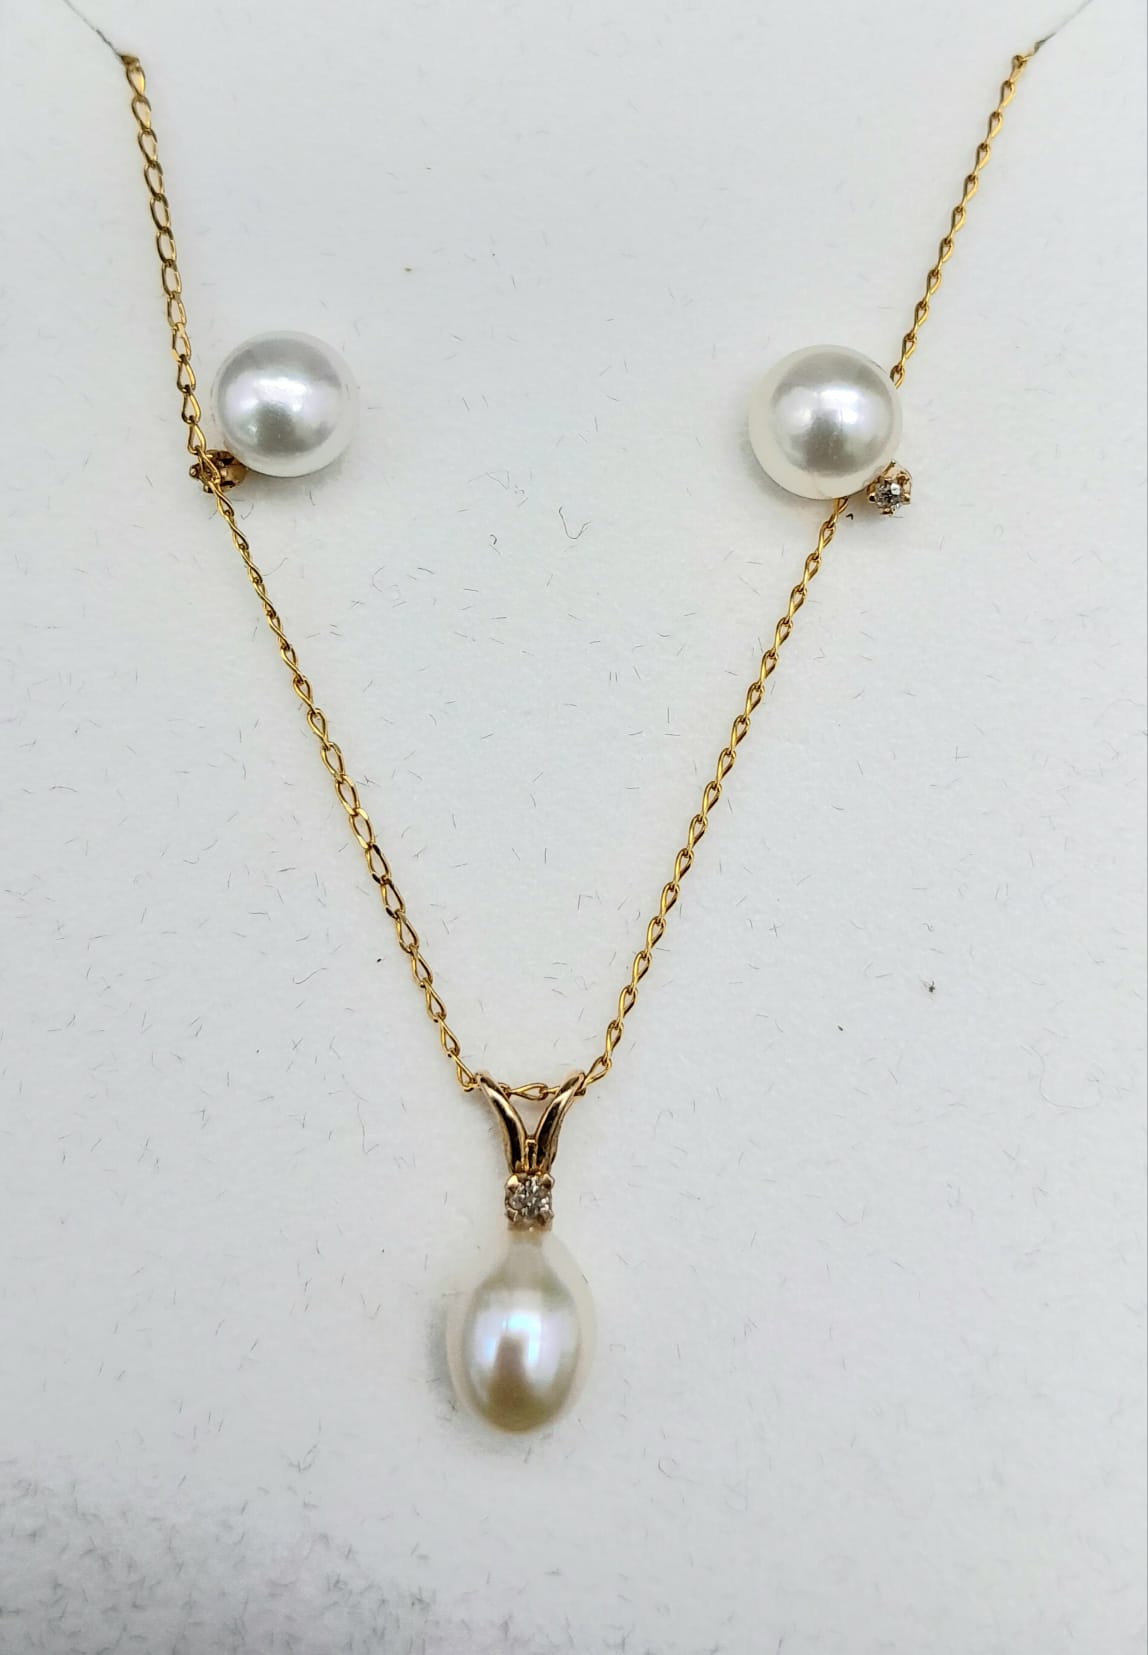 An Unworn 9 Carat Yellow Gold Pearl and Diamond Set Necklace & Matching Earrings. 46cm Length Chain, - Image 6 of 11